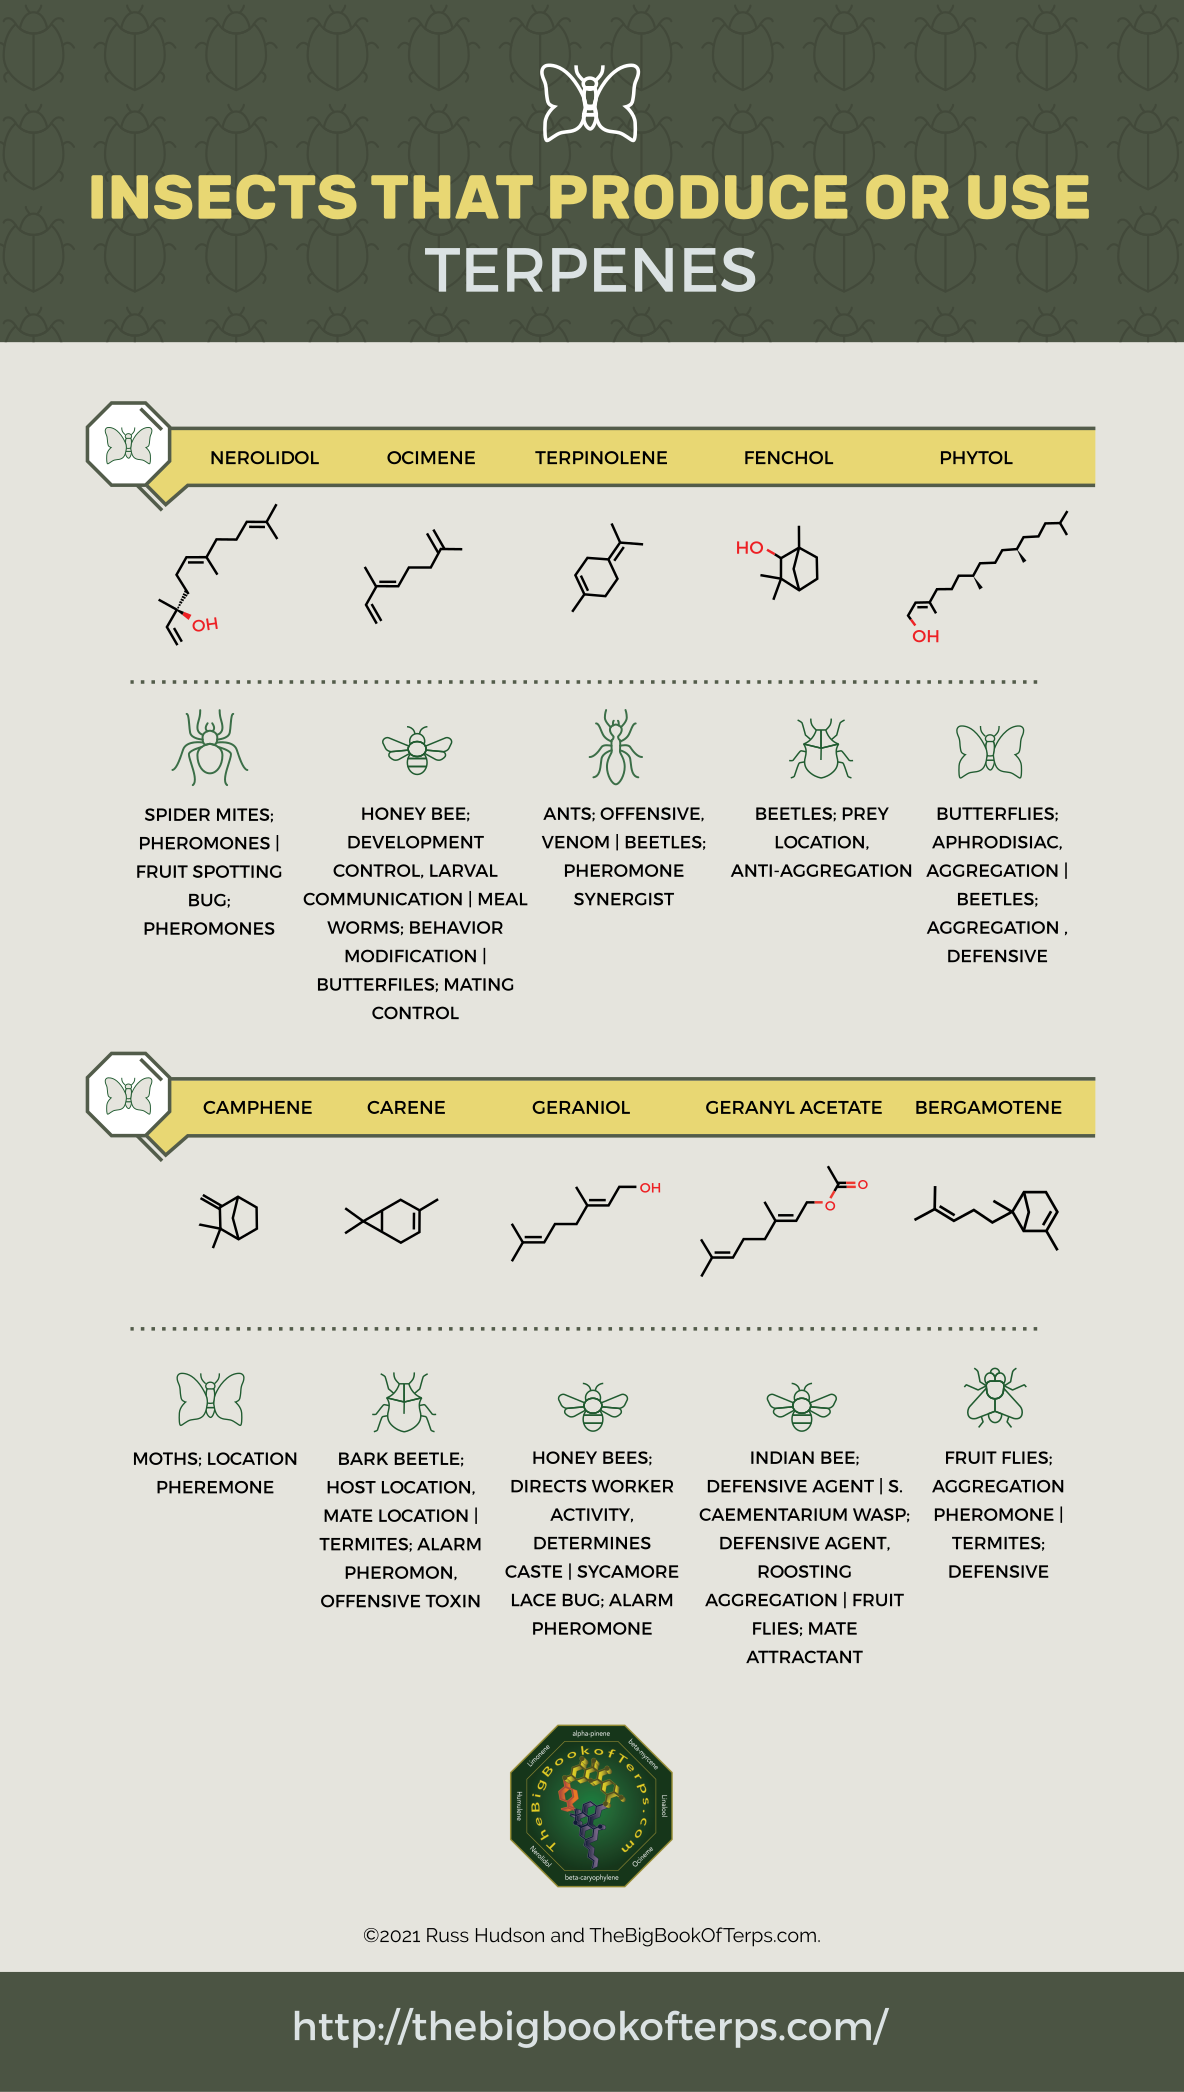 Insects that Produce or Use Terpenes